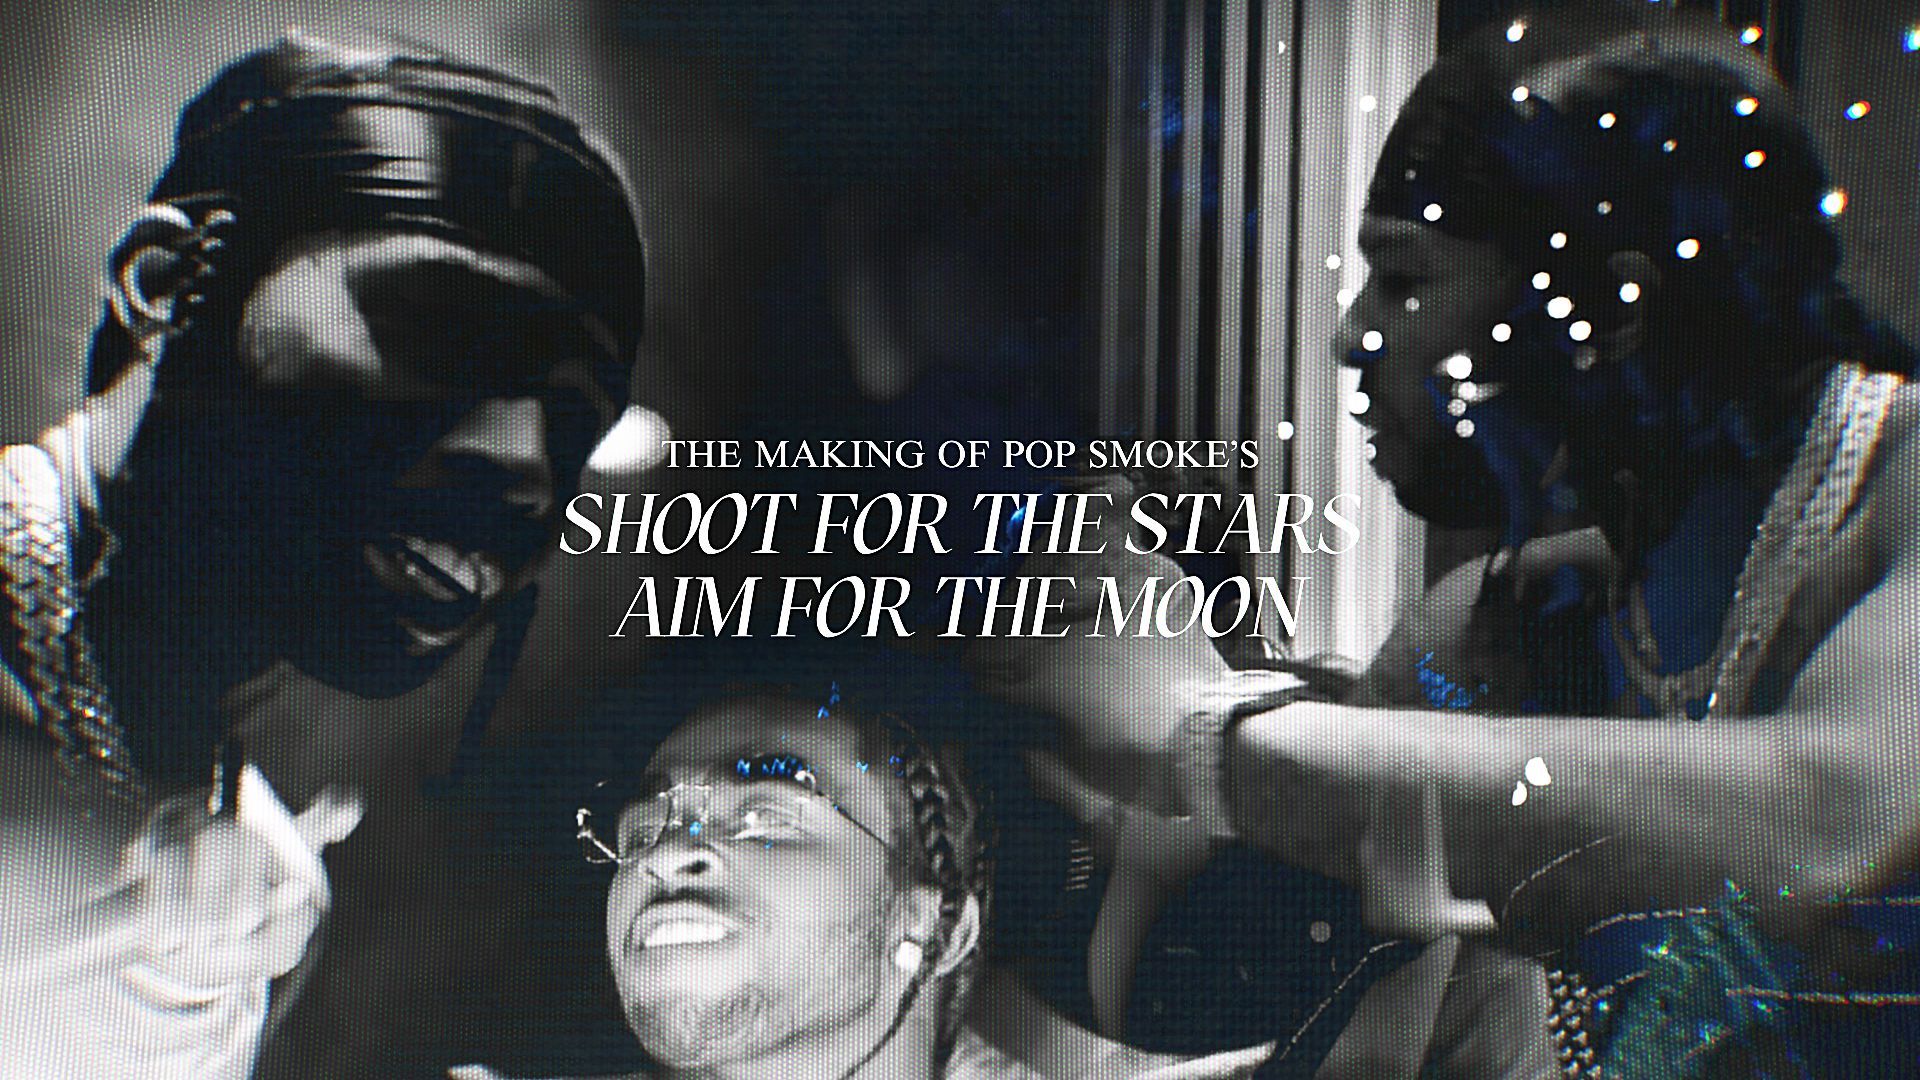 The Making of Pop Smoke's 'Shoot for the Stars Aim for the Moon'